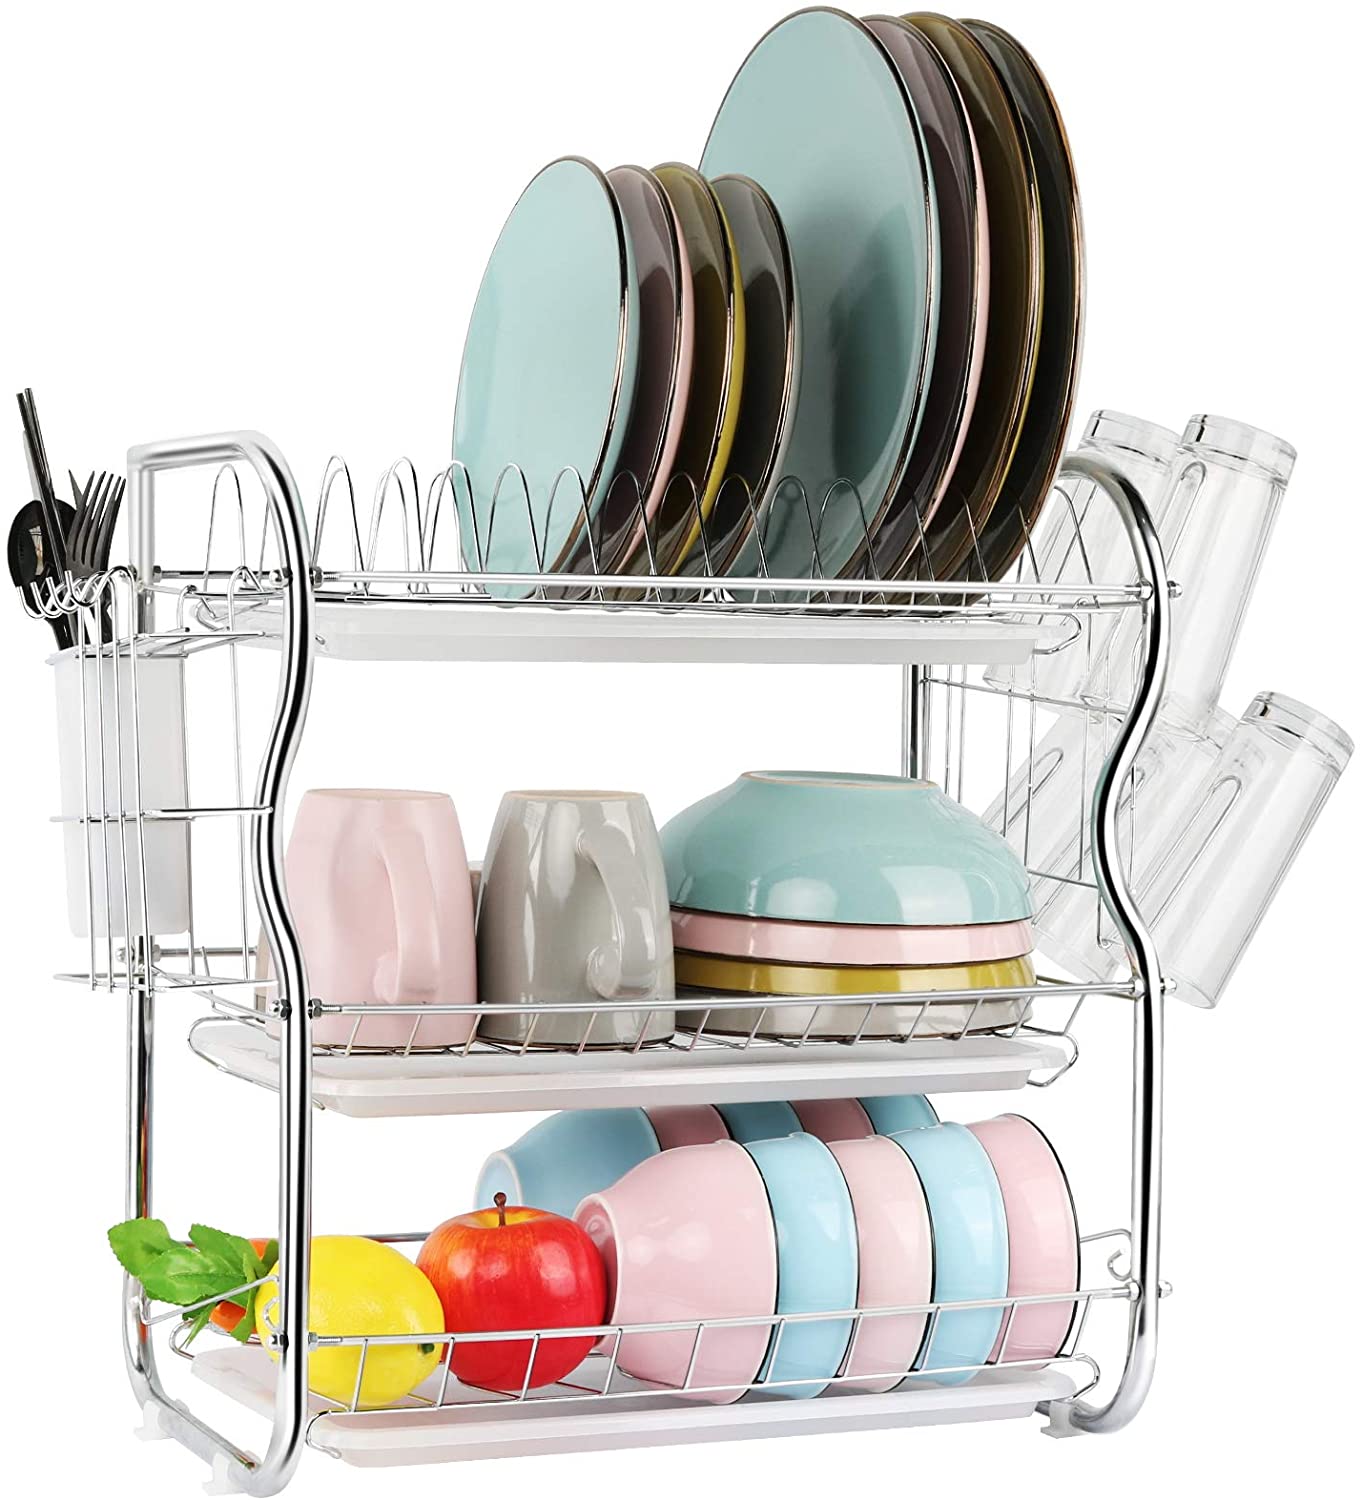 stainless steel dish drainer rack